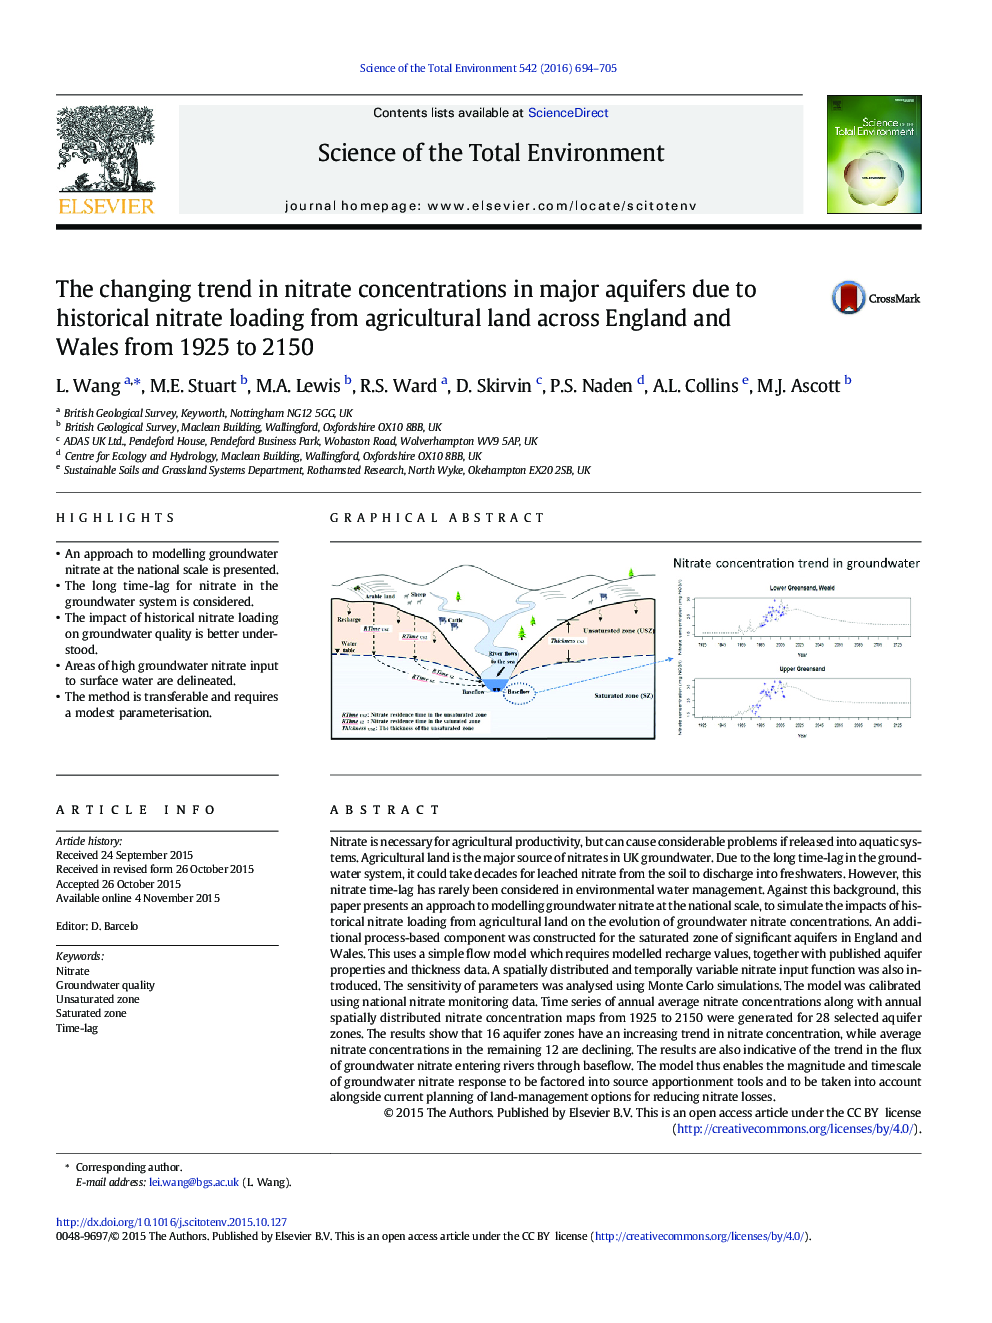 The changing trend in nitrate concentrations in major aquifers due to historical nitrate loading from agricultural land across England and Wales from 1925 to 2150